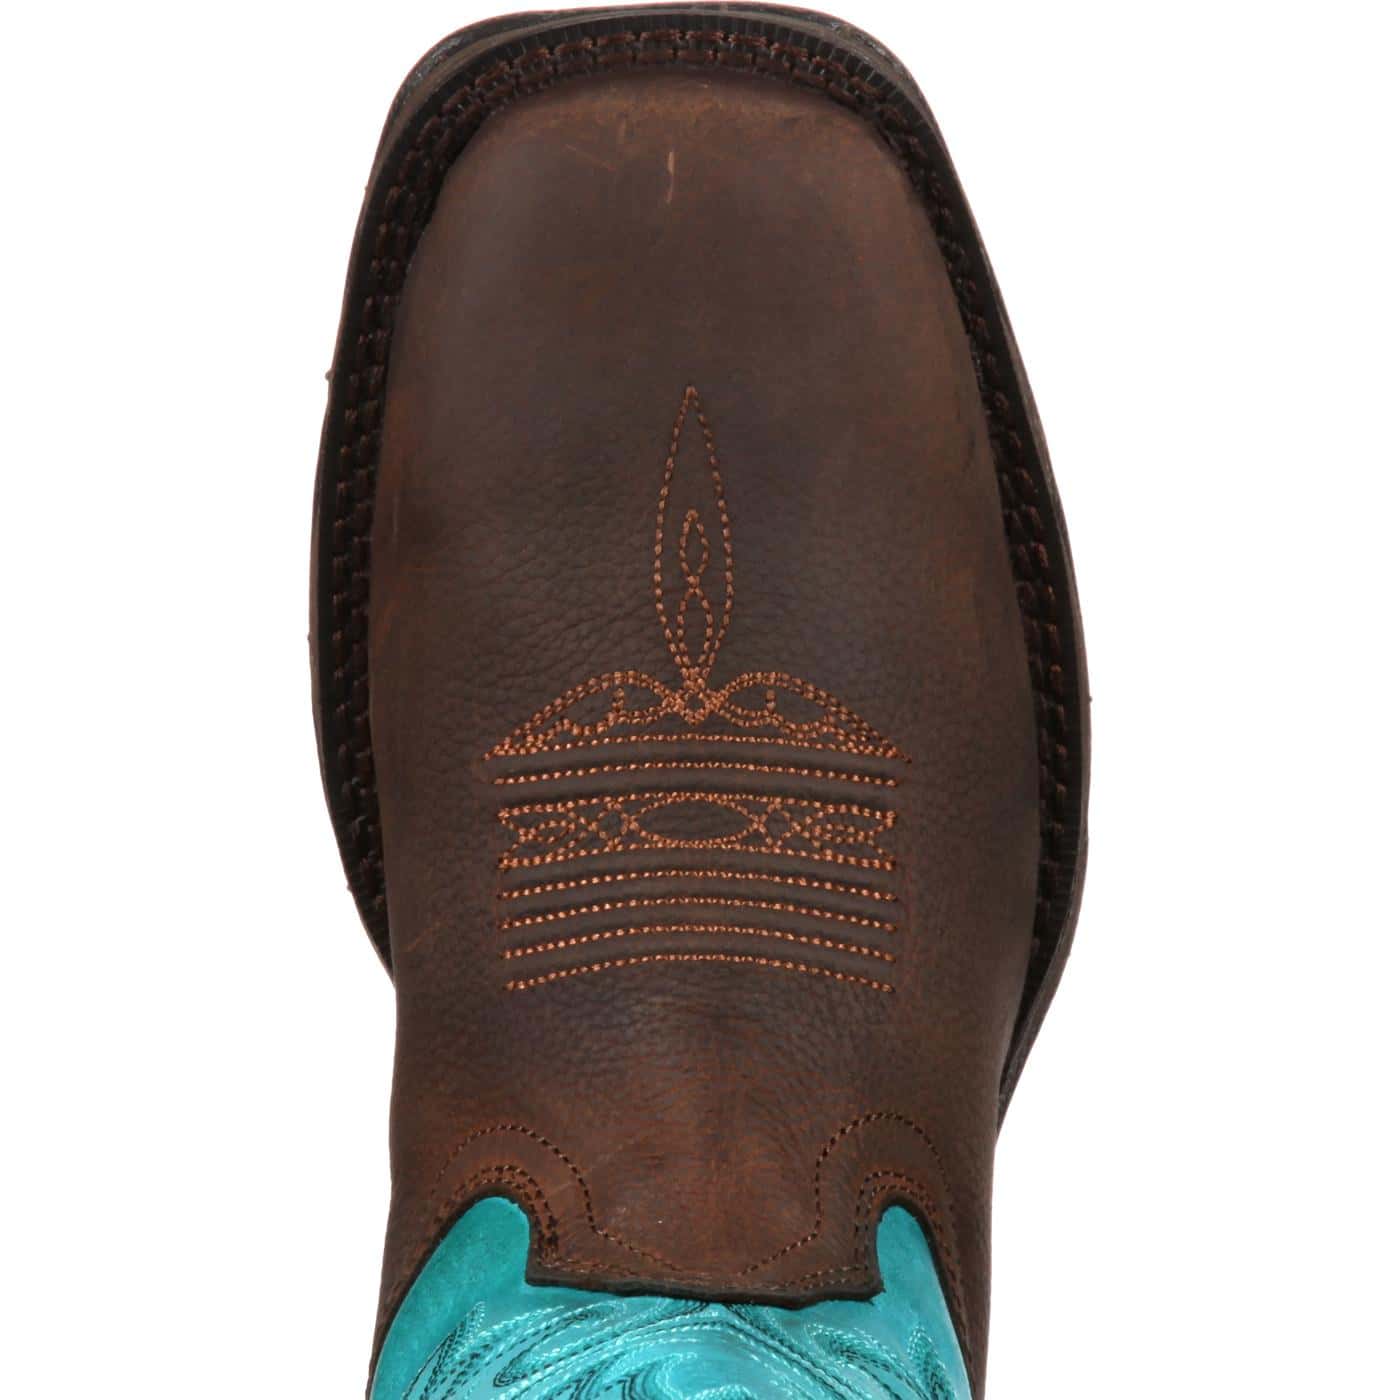 Durango |  Lady Rebel Women's Western Boot |  Brown / Turquoise - Outback Traders Australia